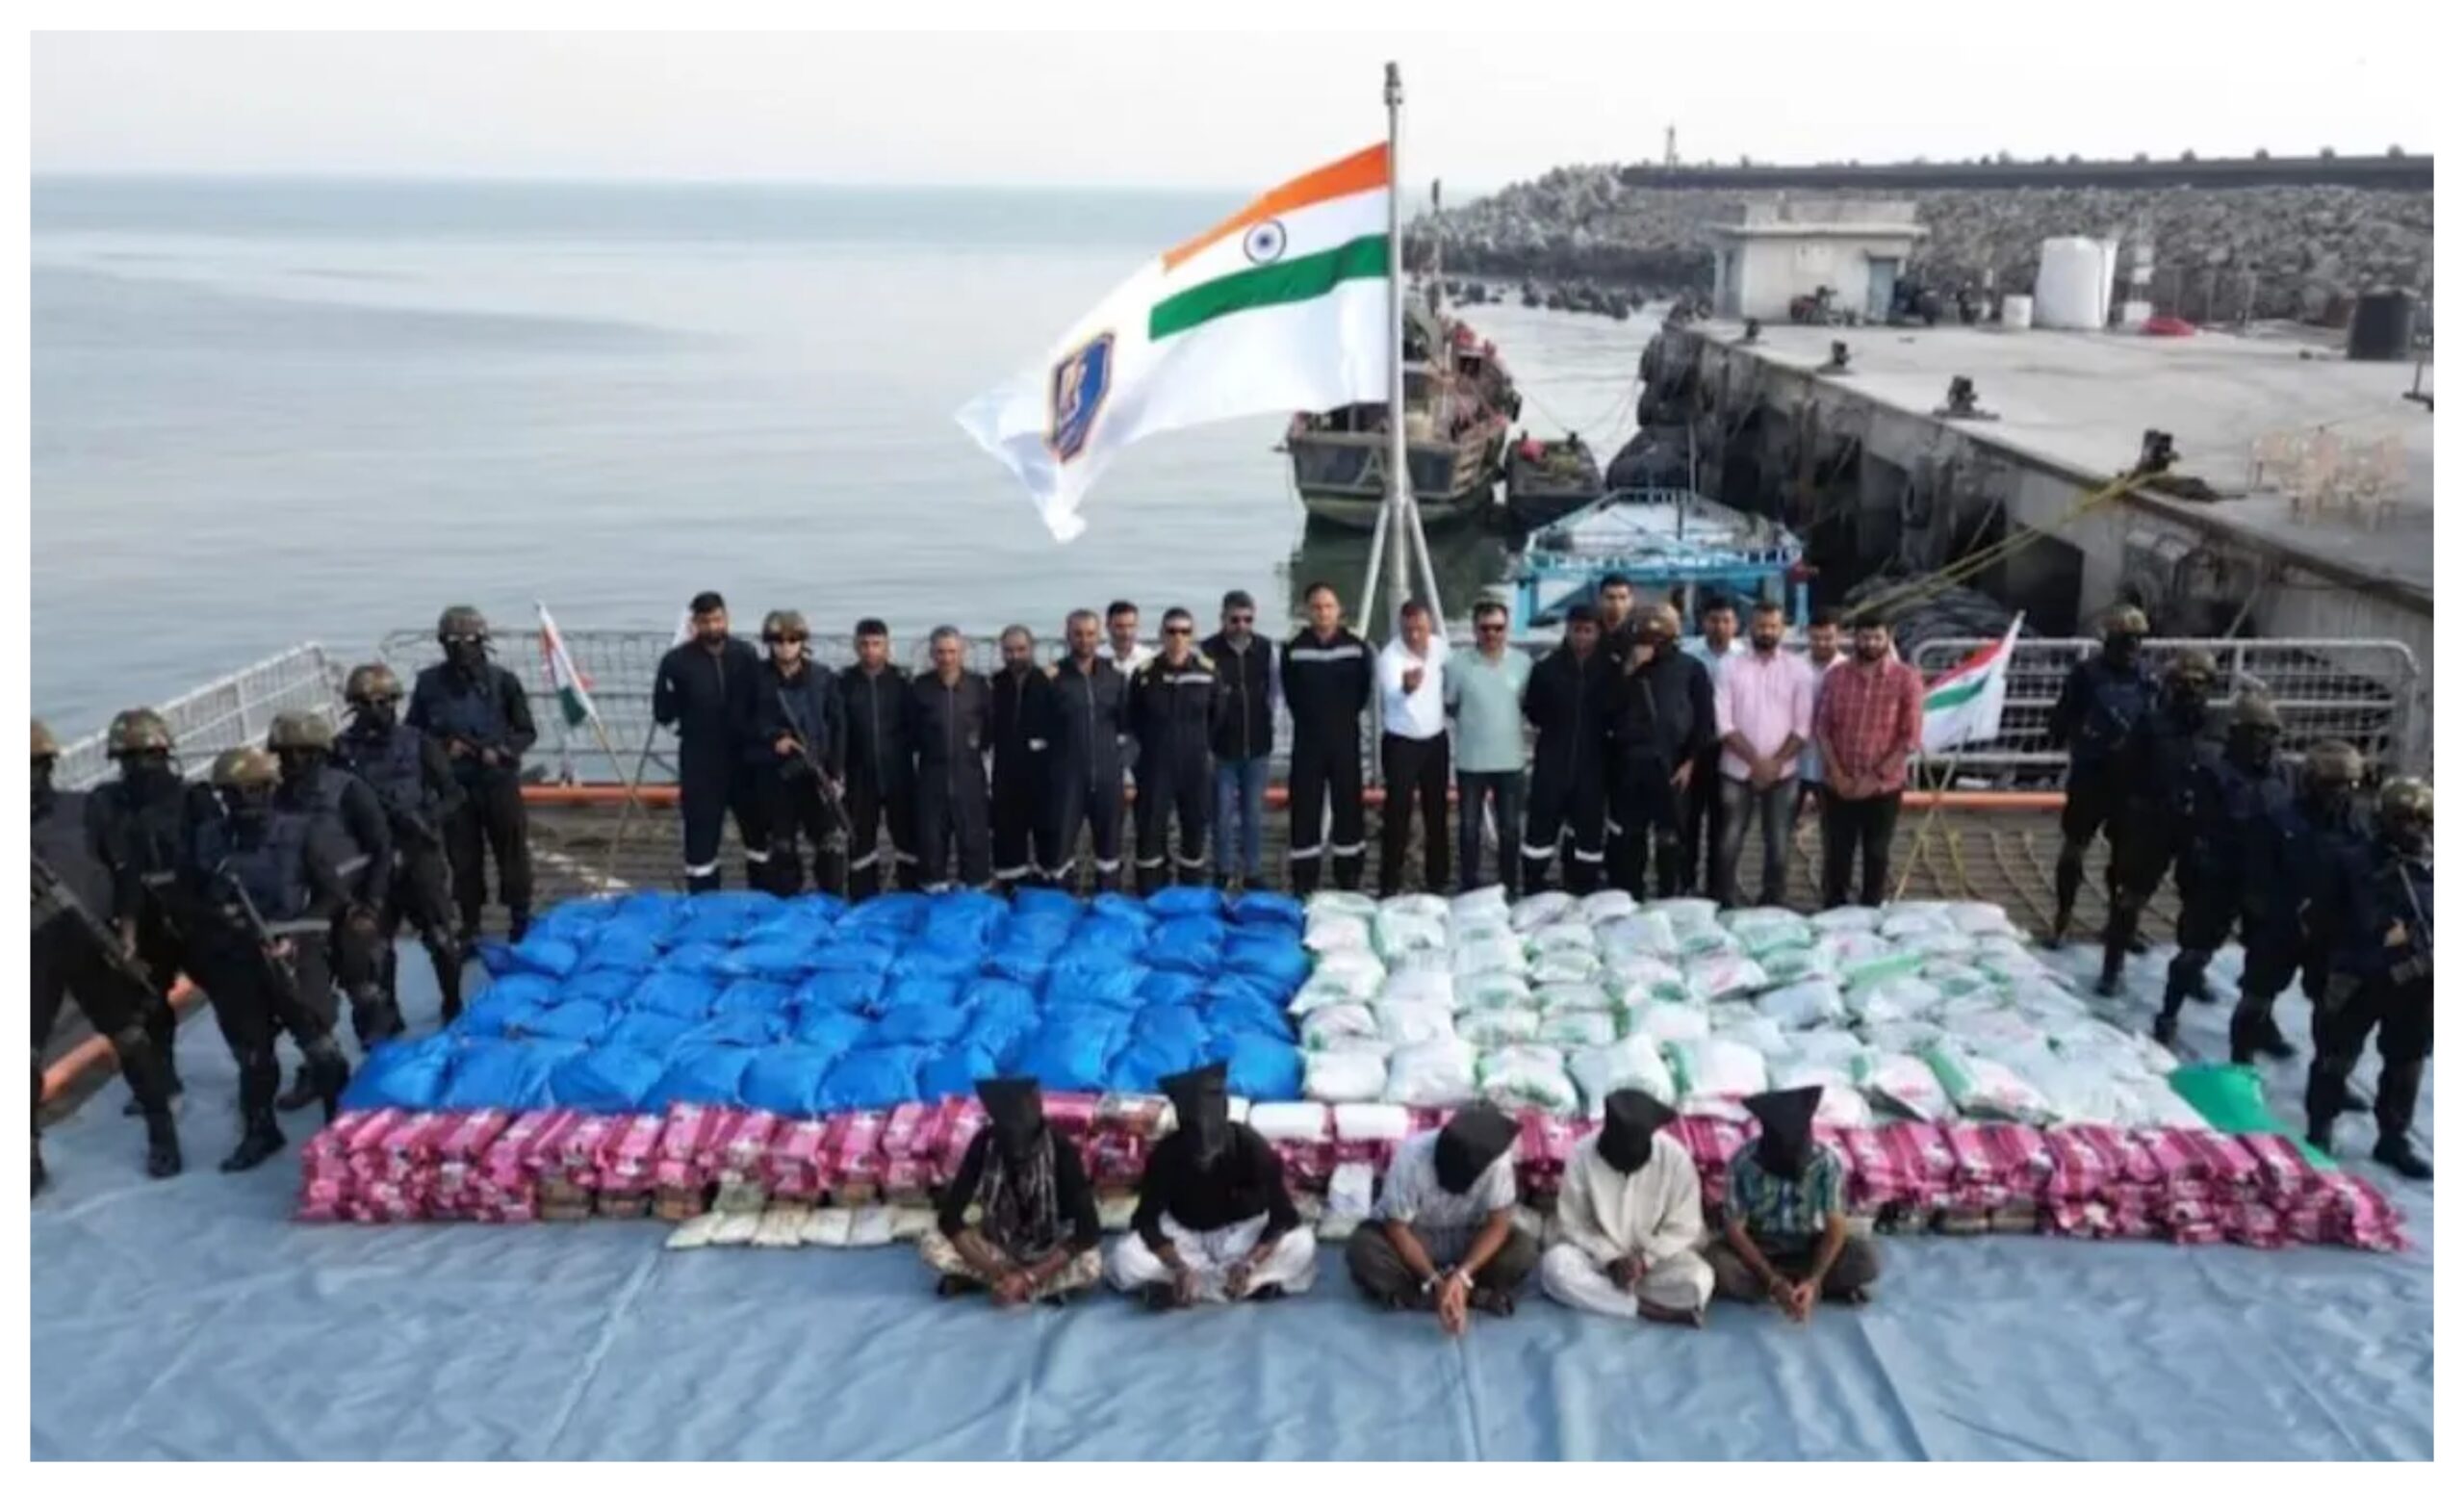 Gujarat: Indian Navy seized 3,300 kg of drugs, 5 arrested, Home Minister Amit Shah congratulated on seizure of 3,300 kg drugs in hindi news